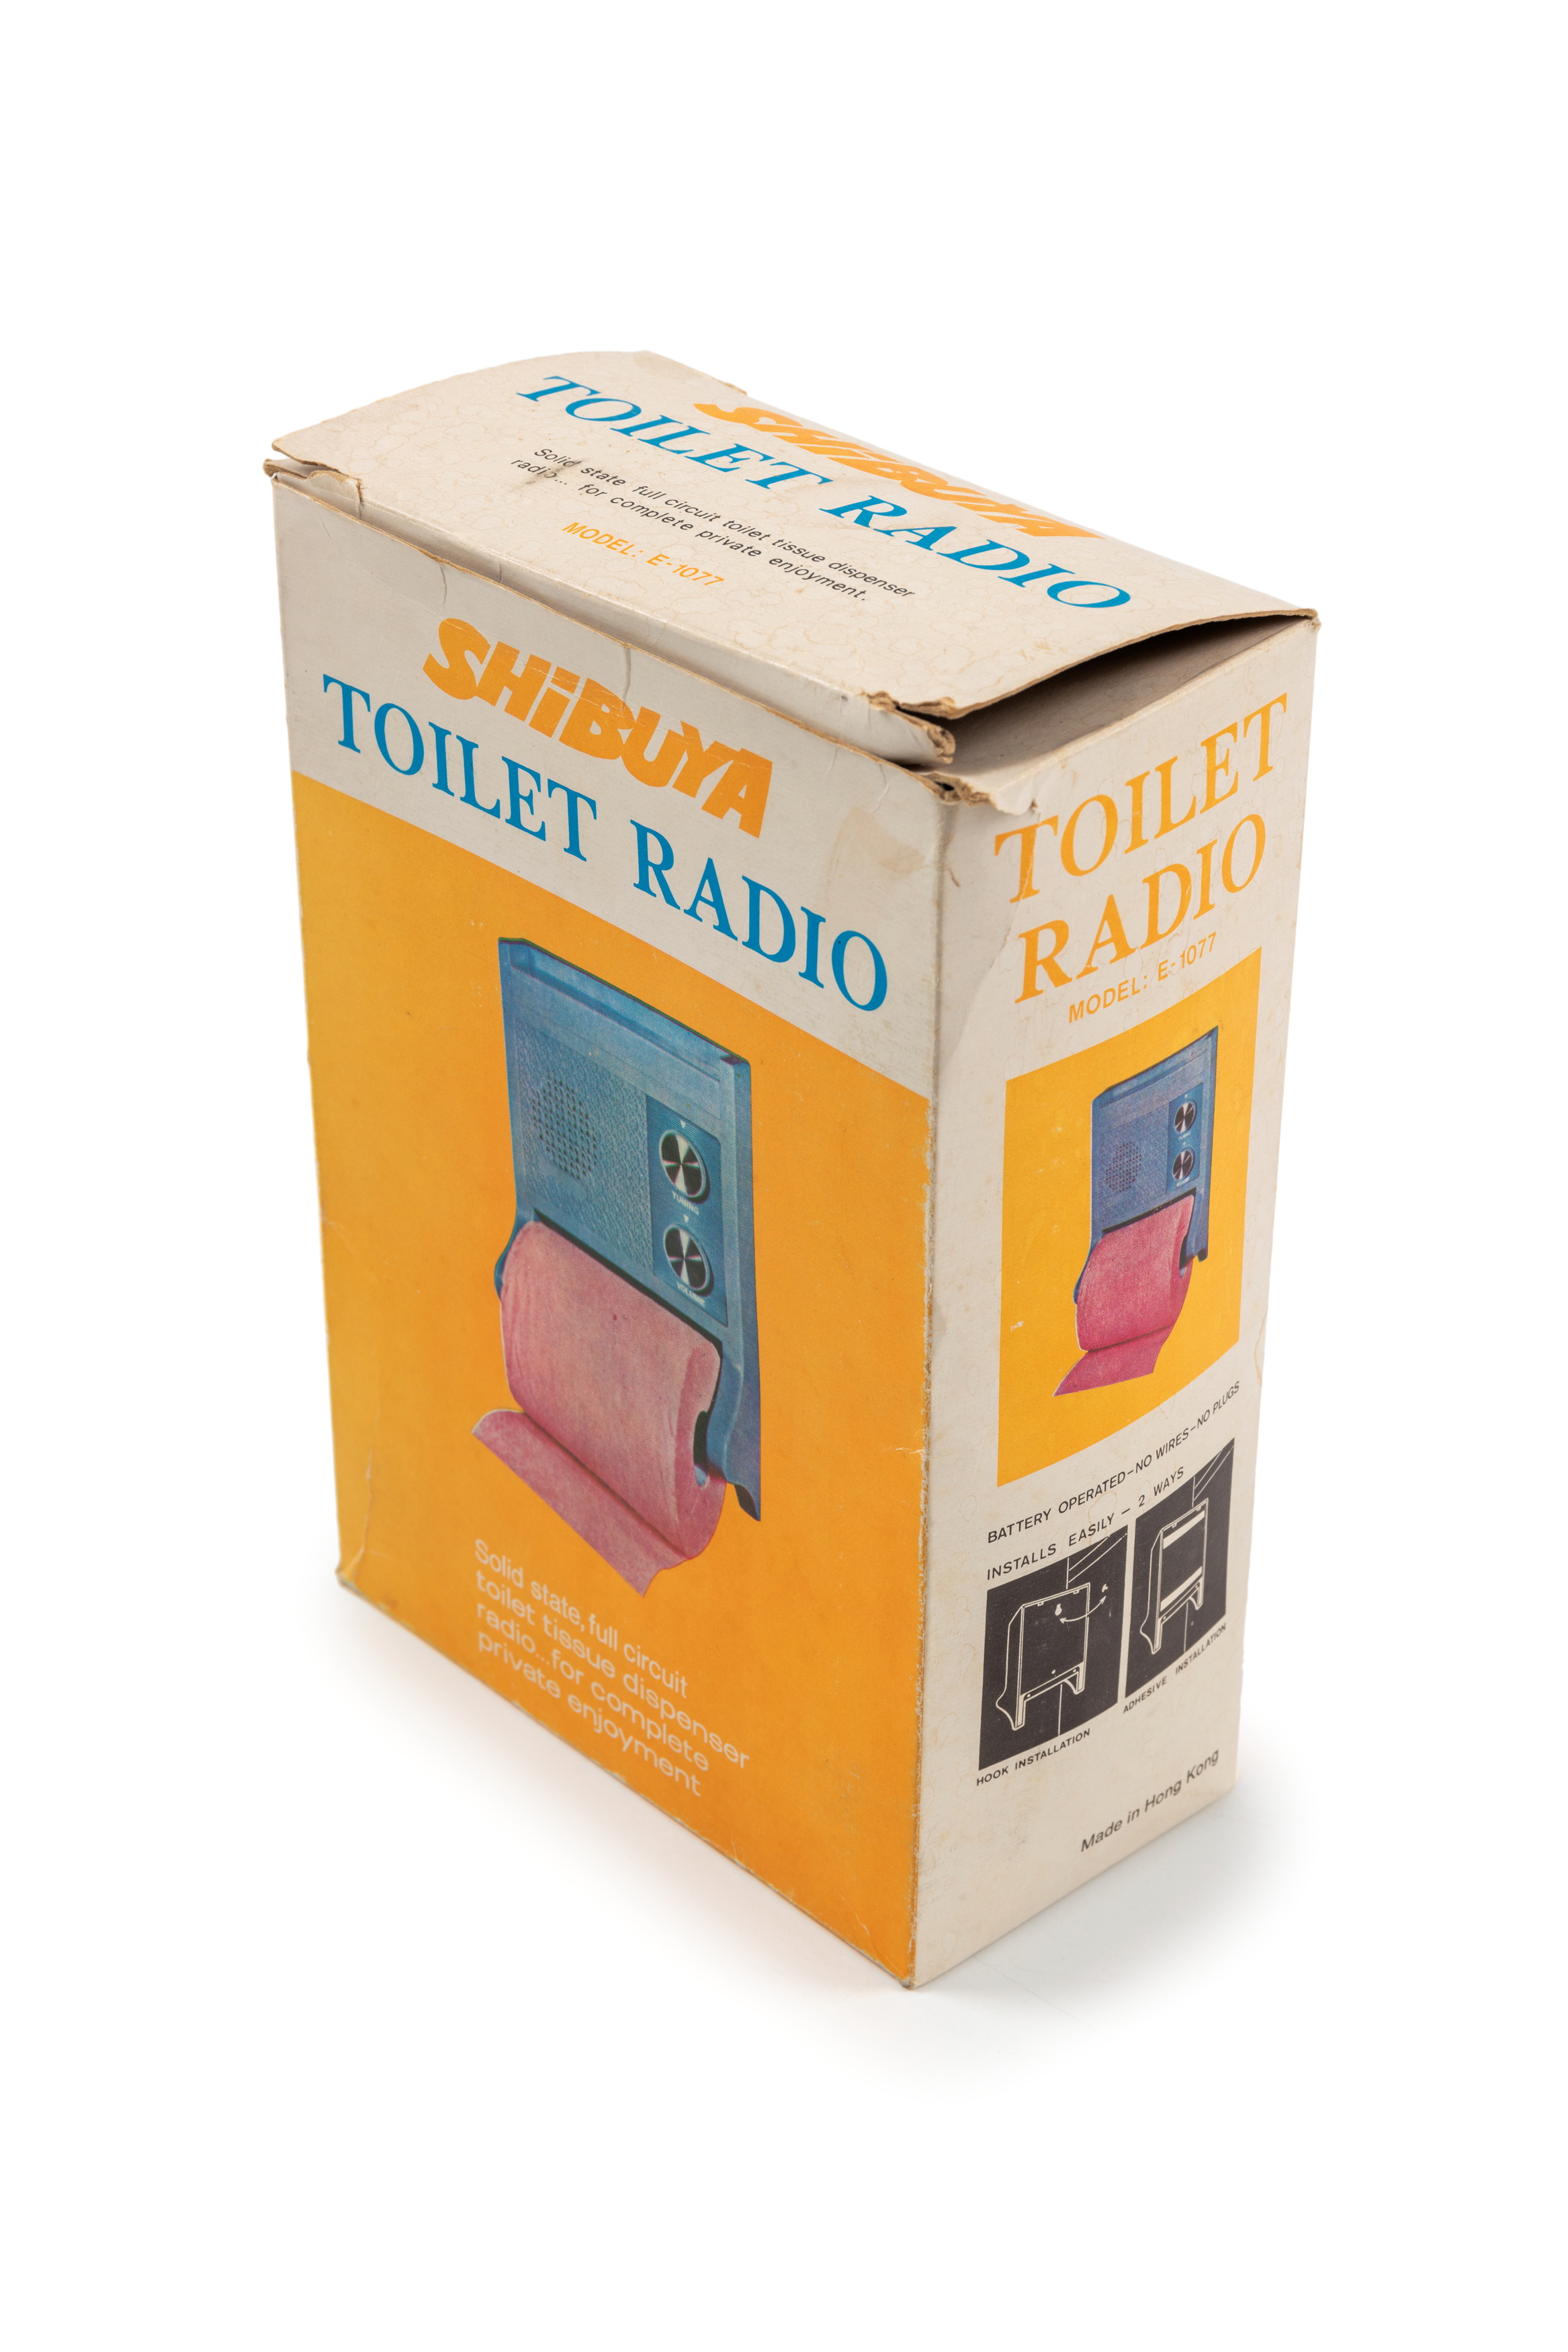 Radio with toilet roll holder